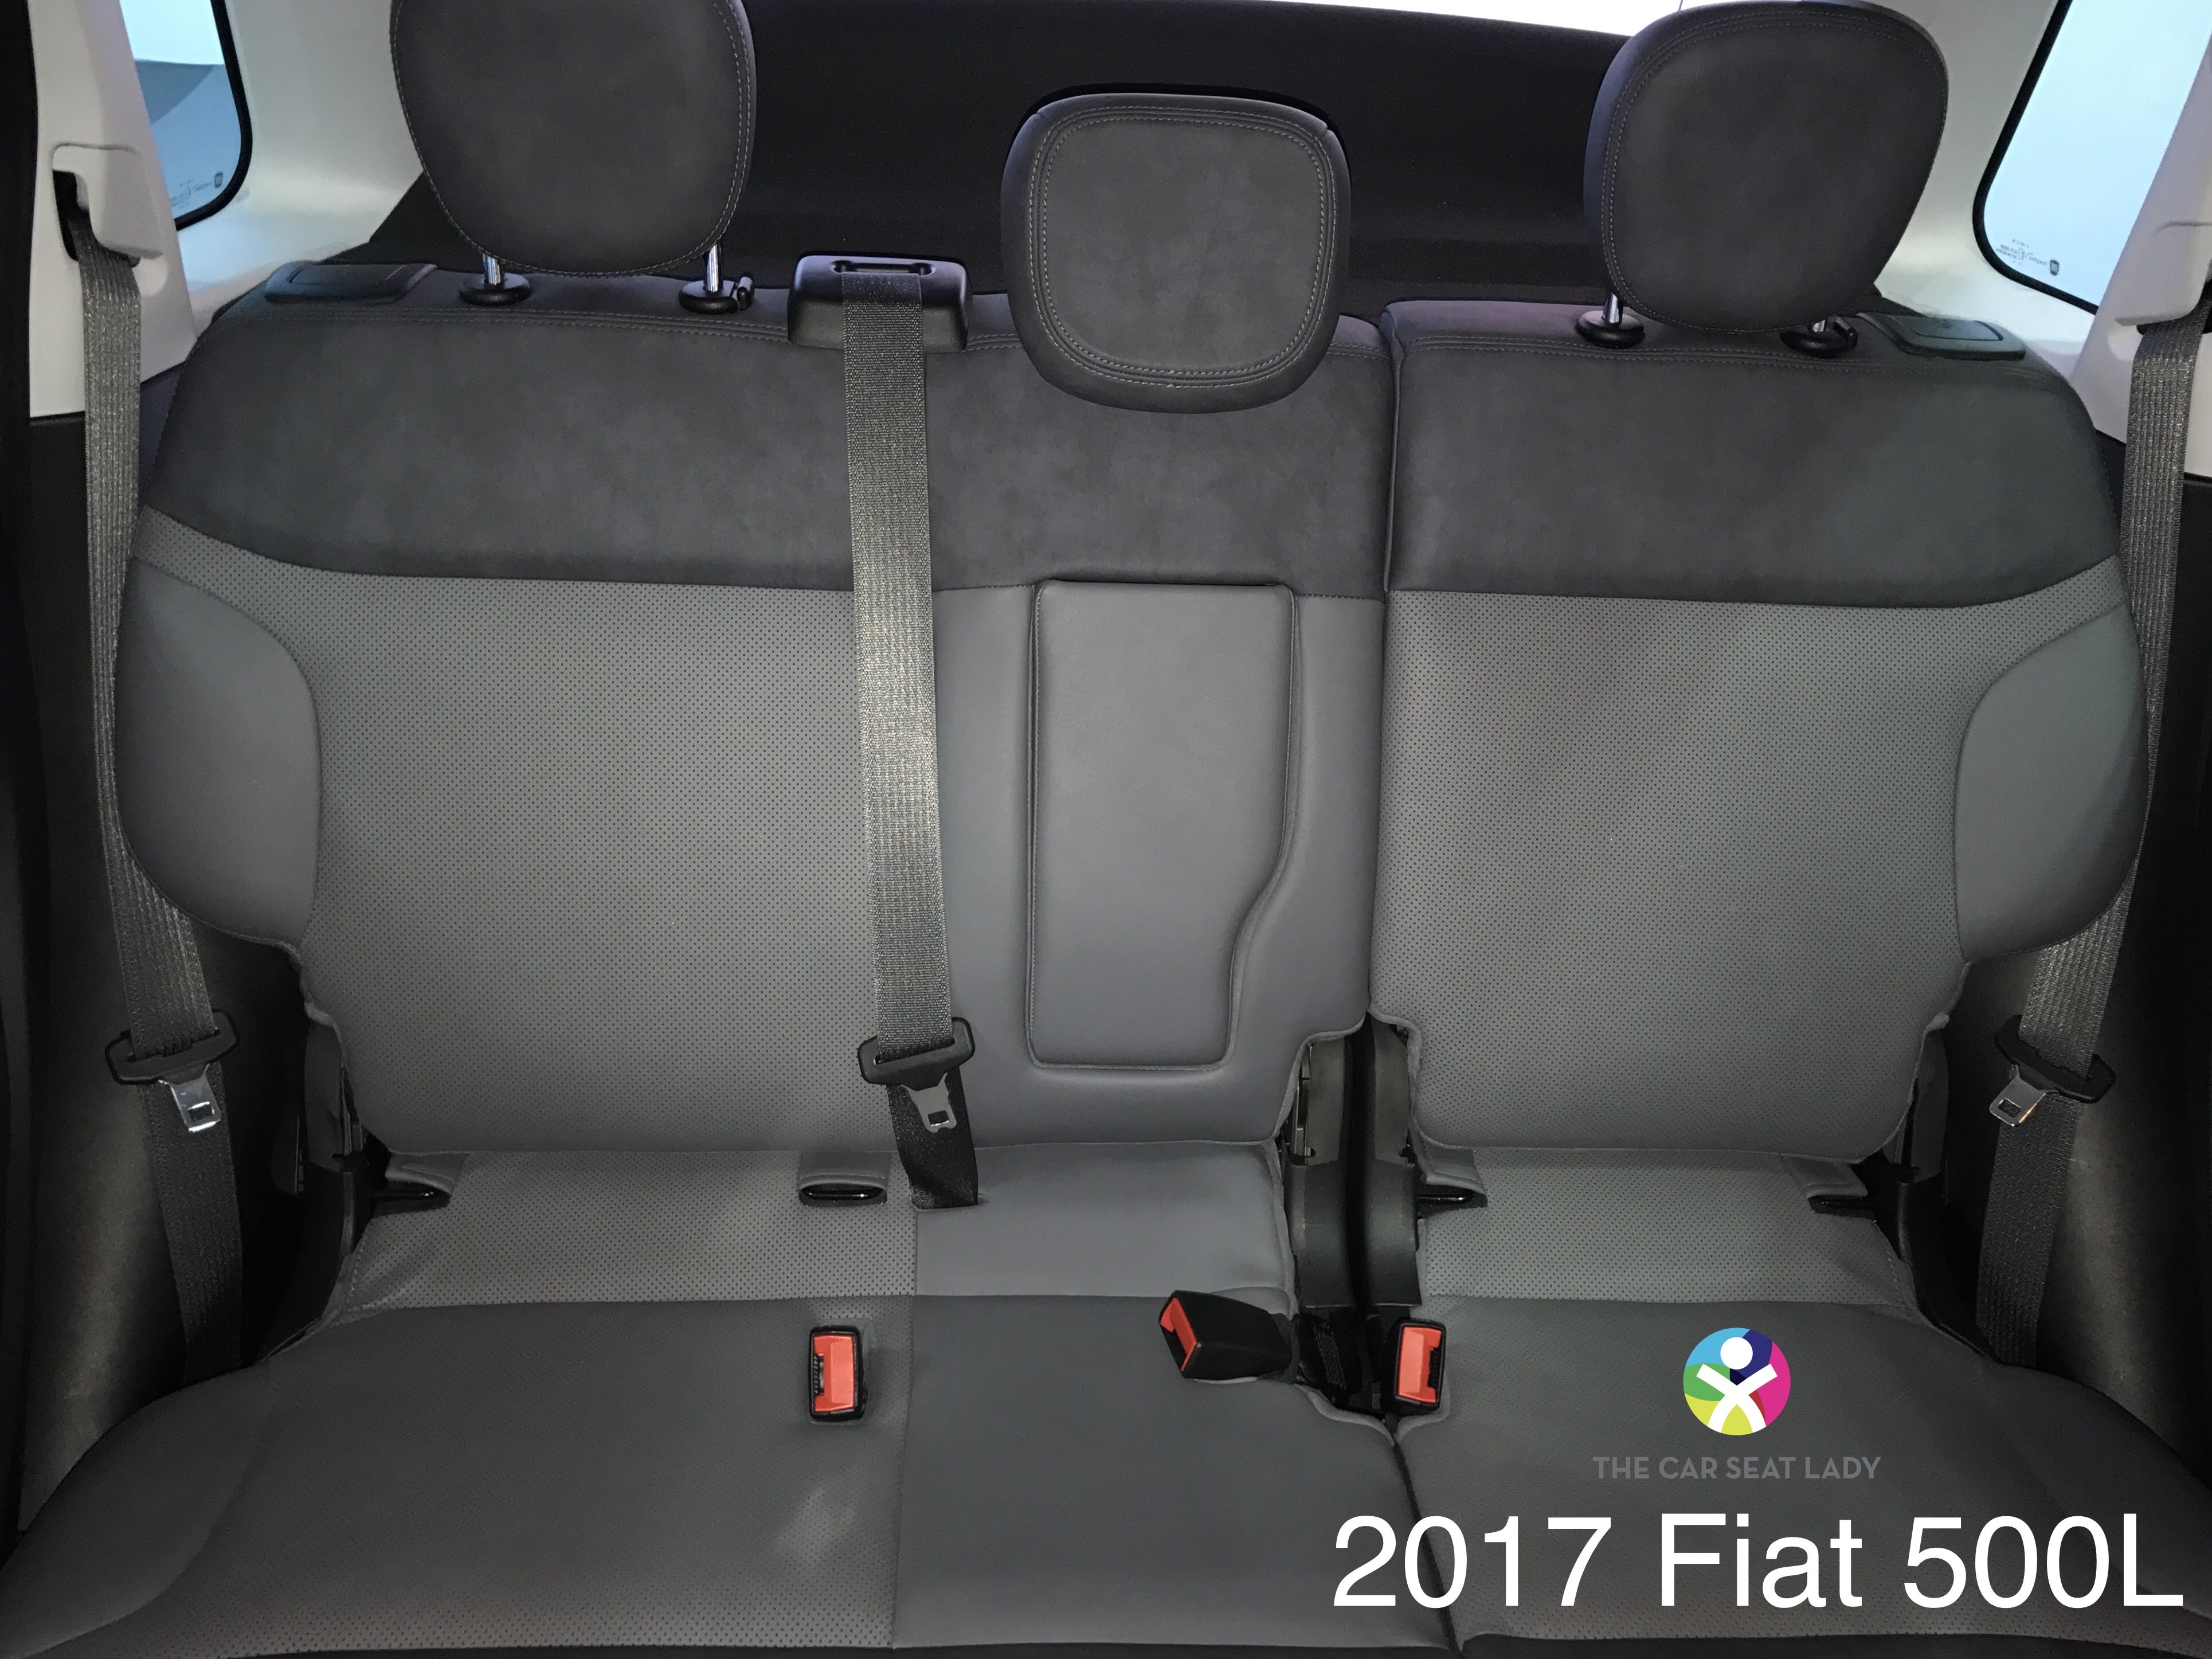 The Car Seat LadyFiat 500L - The Seat